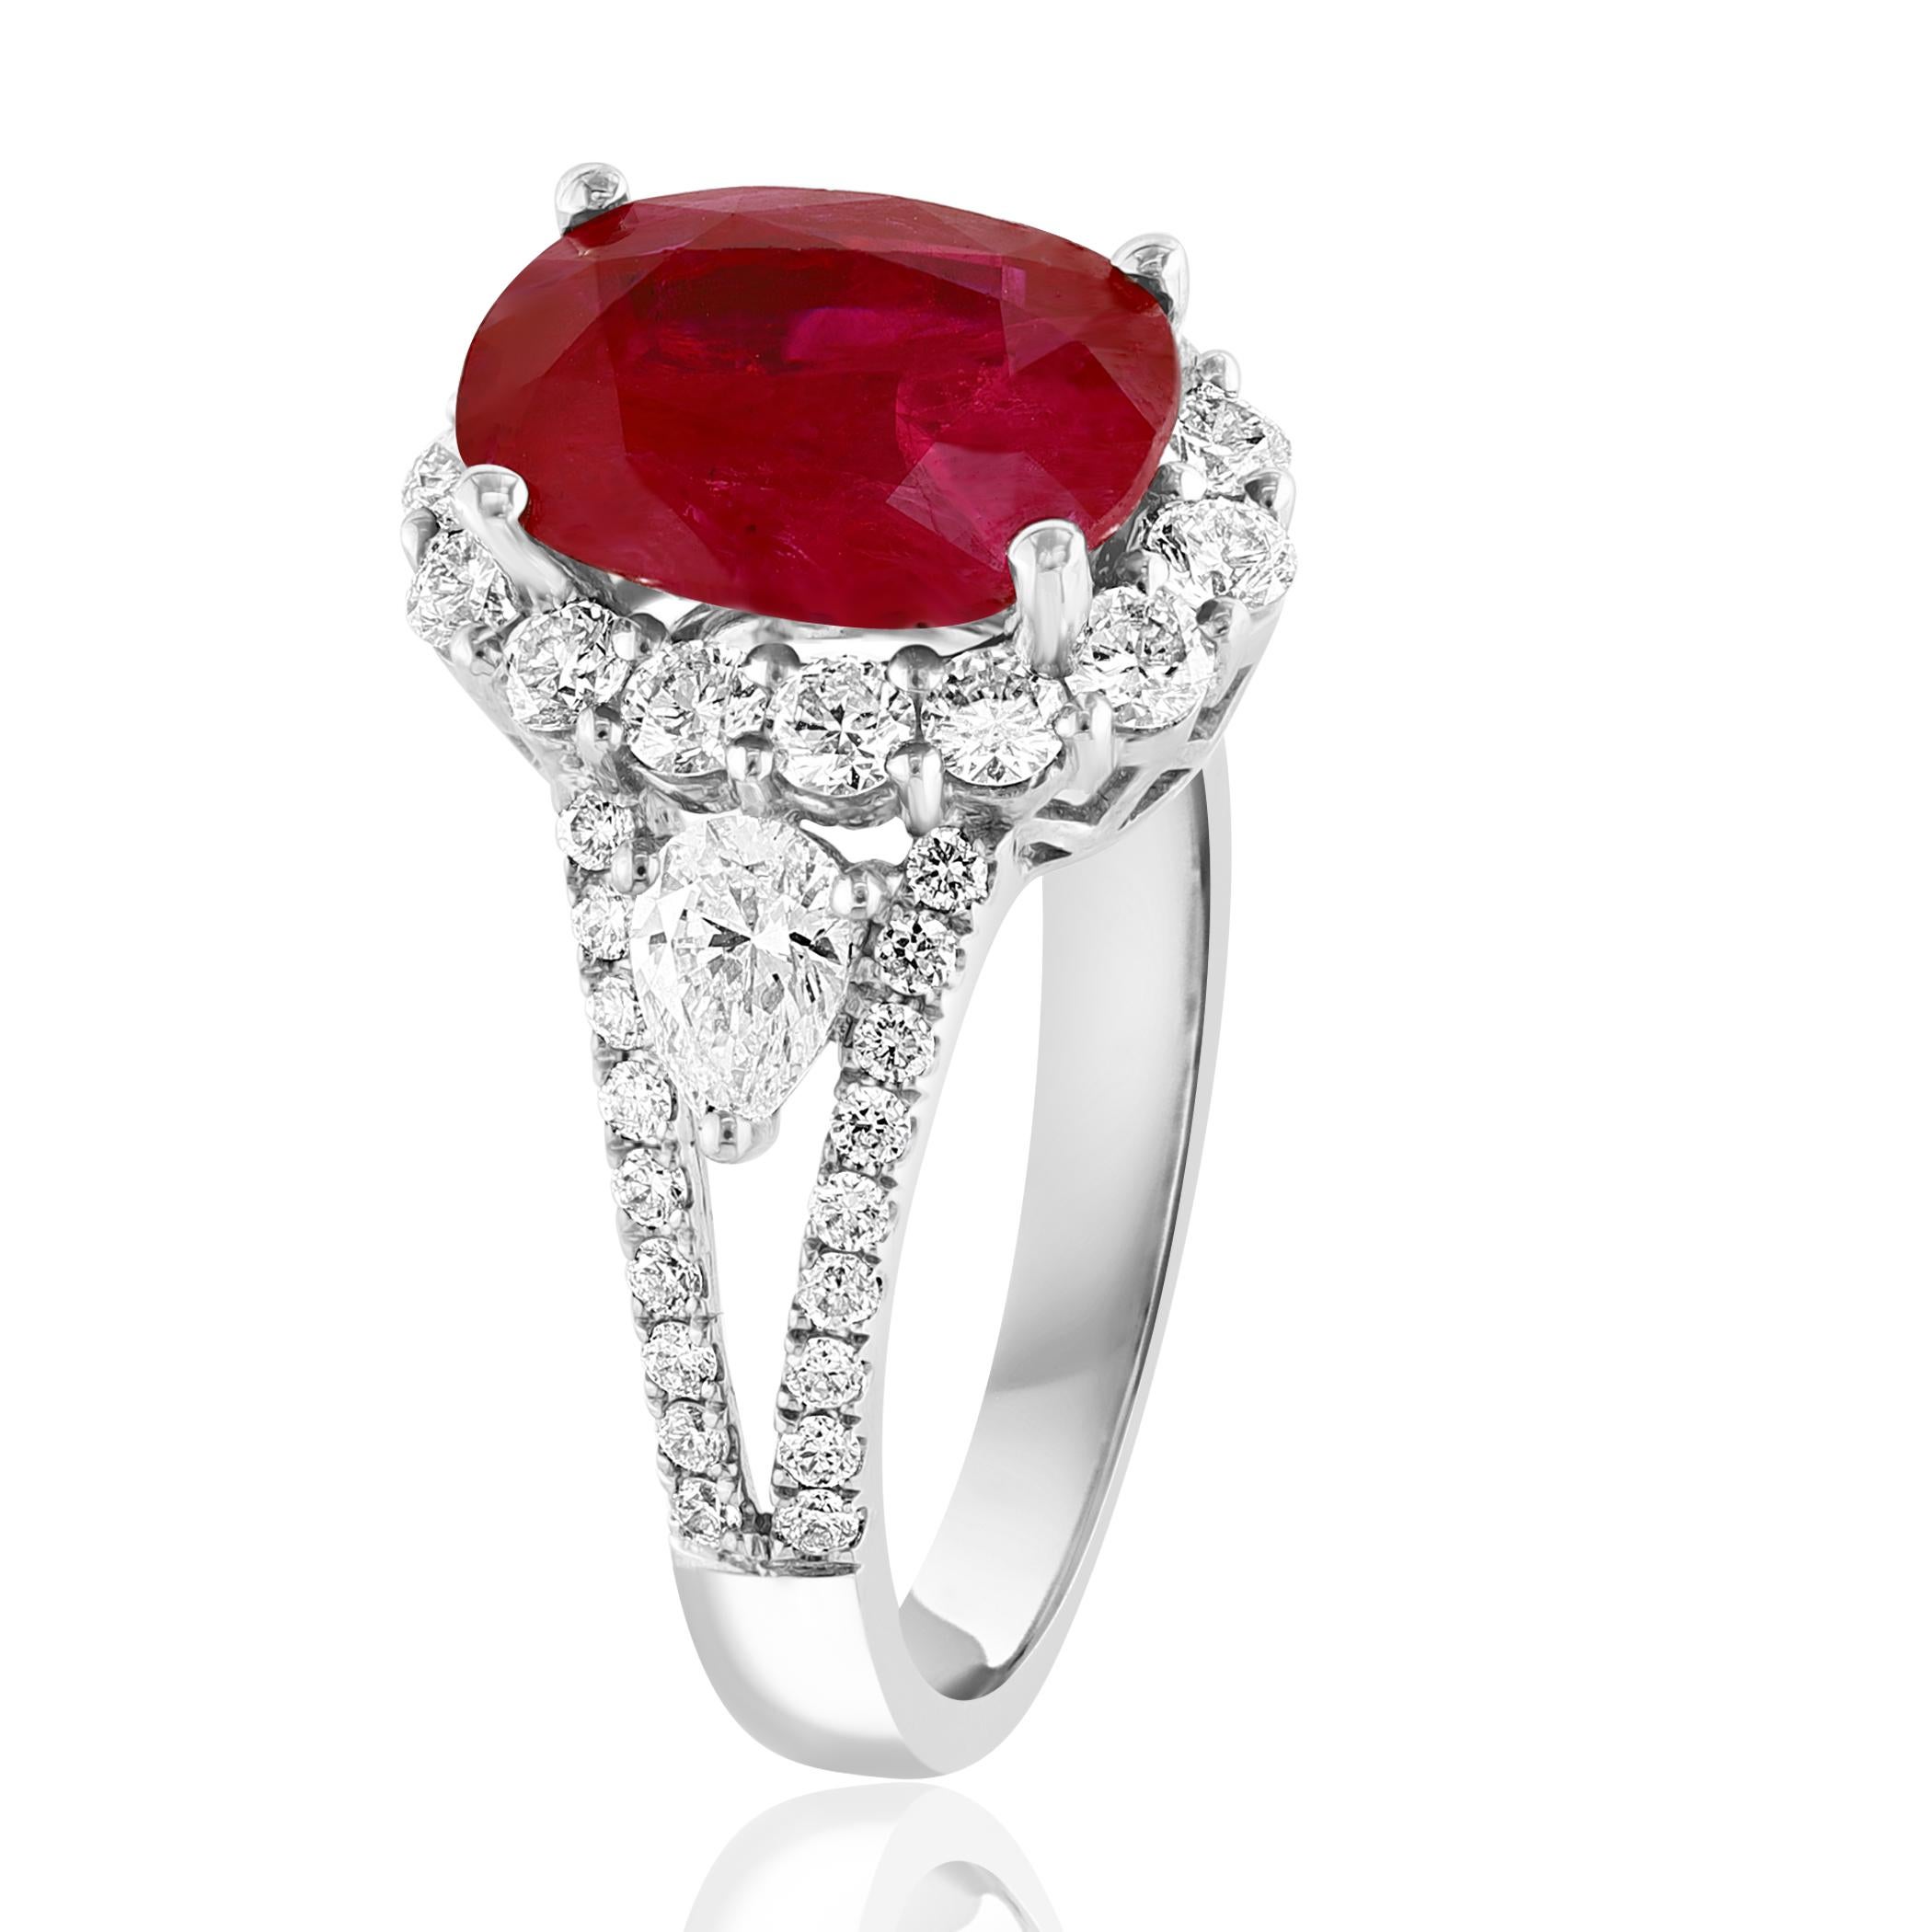 A stunning ring showcasing a rich Red Oval Cut Ruby weighing 3.58 carats surrounded by a row of diamonds. Flanking the center stone are brilliant cut 2 pear diamonds and accent diamonds, weighing 1.20 carats total, framed in a brilliant diamond